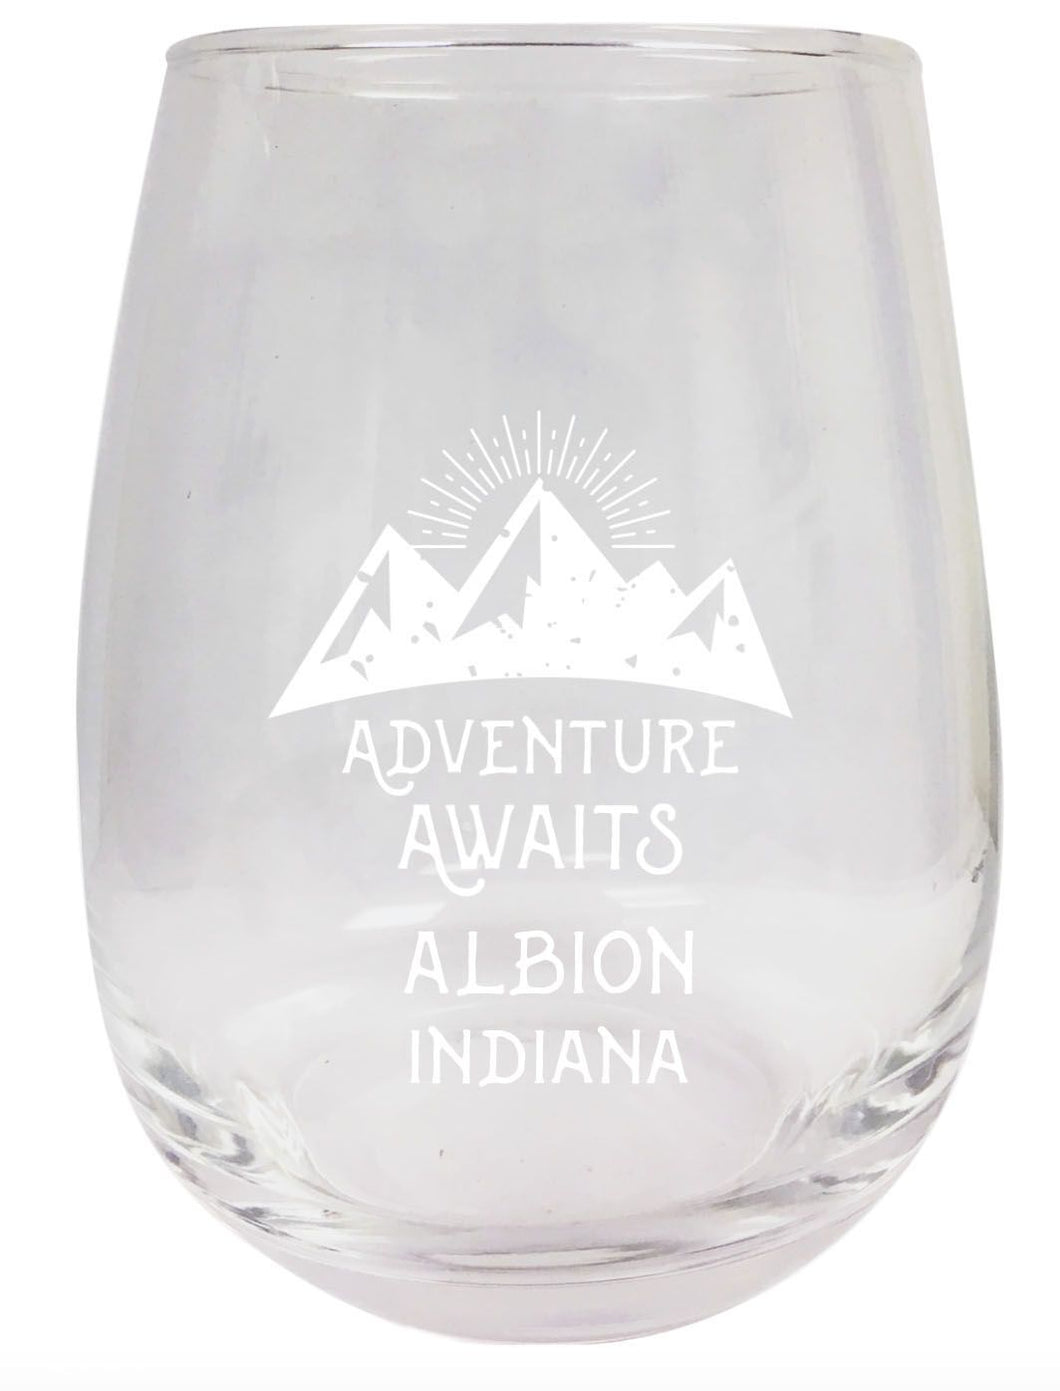 Indiana Engraved Stemless Wine Glass Duo